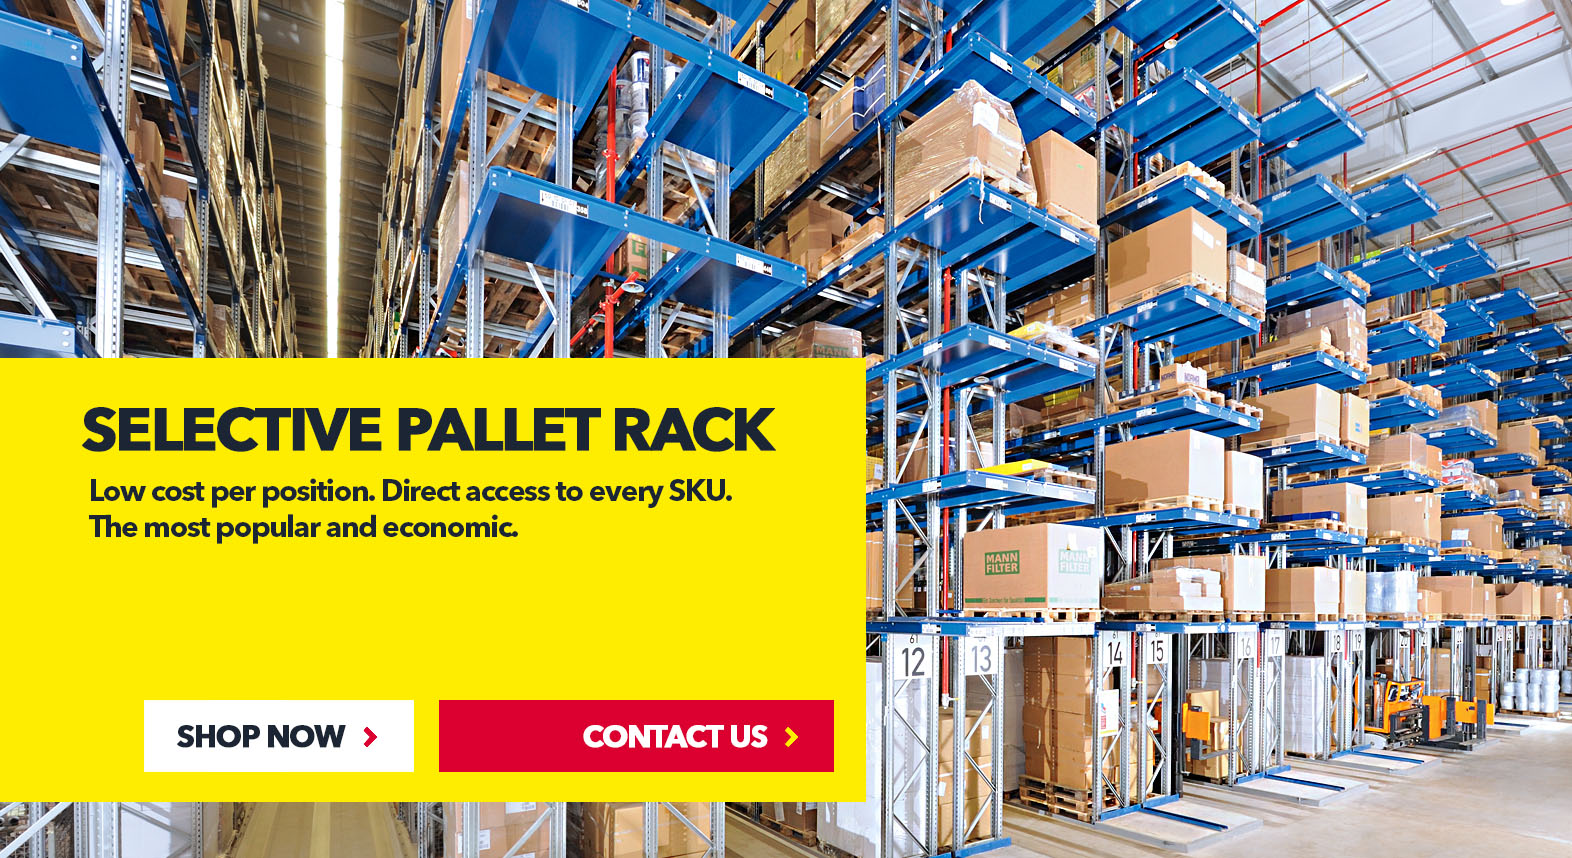 Selective Pallet Rack by SSI Schaefer USA Download Guide, Watch Video, Contact Us. www.chaefershelving.com